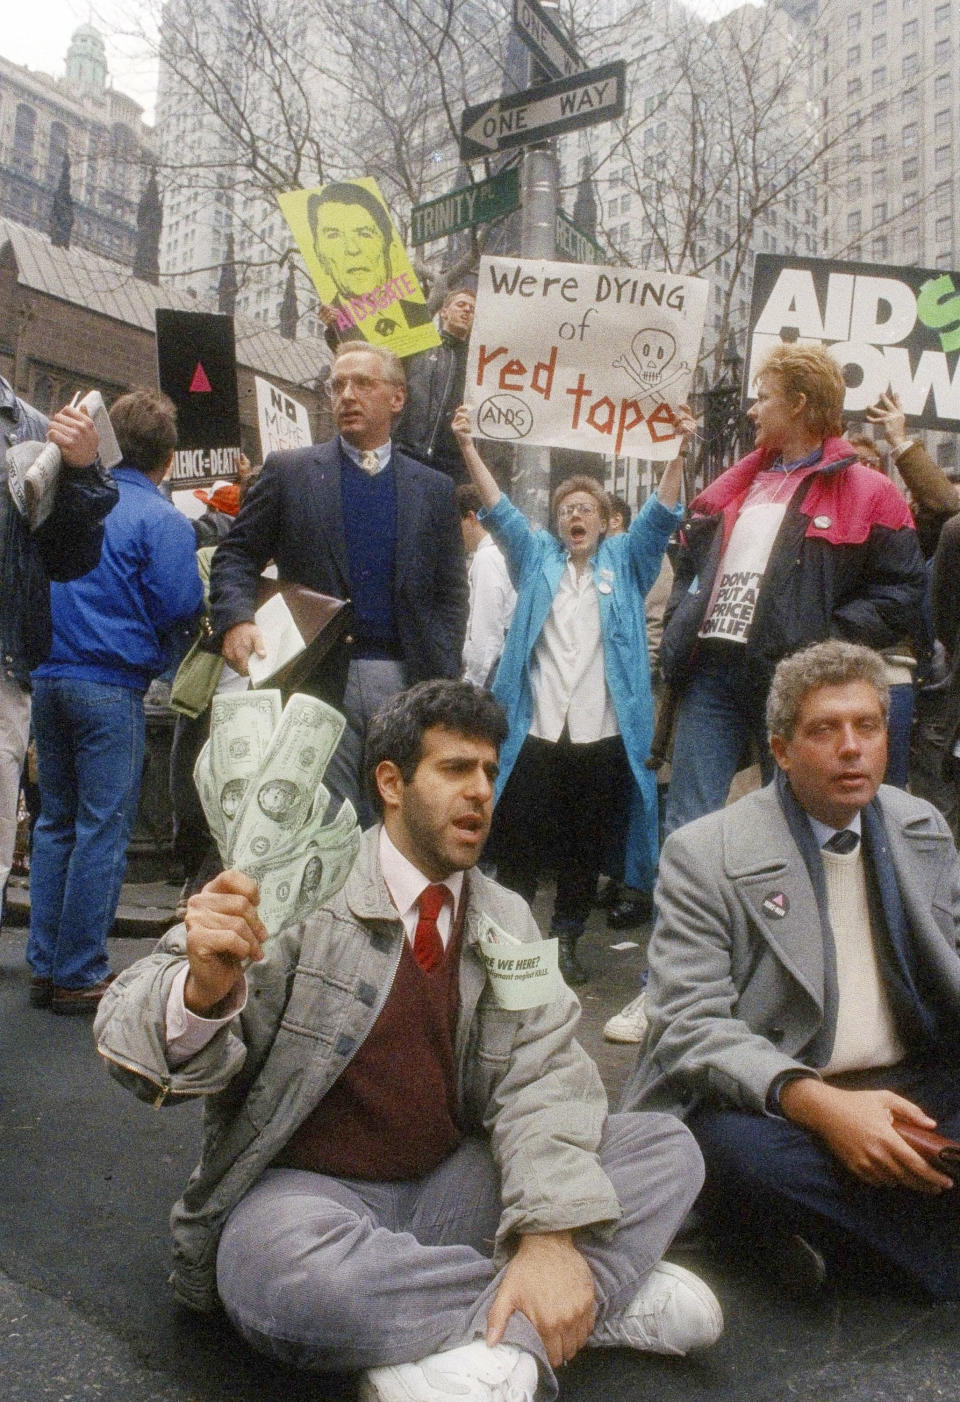 FILE - In this March 24, 1988 file photo, demonstrators stage a sit-in at the corner of Trinity and Rector Streets in New York protesting what they call a lack of government concern about AIDS. (AP Photo/Ed Bailey, File)